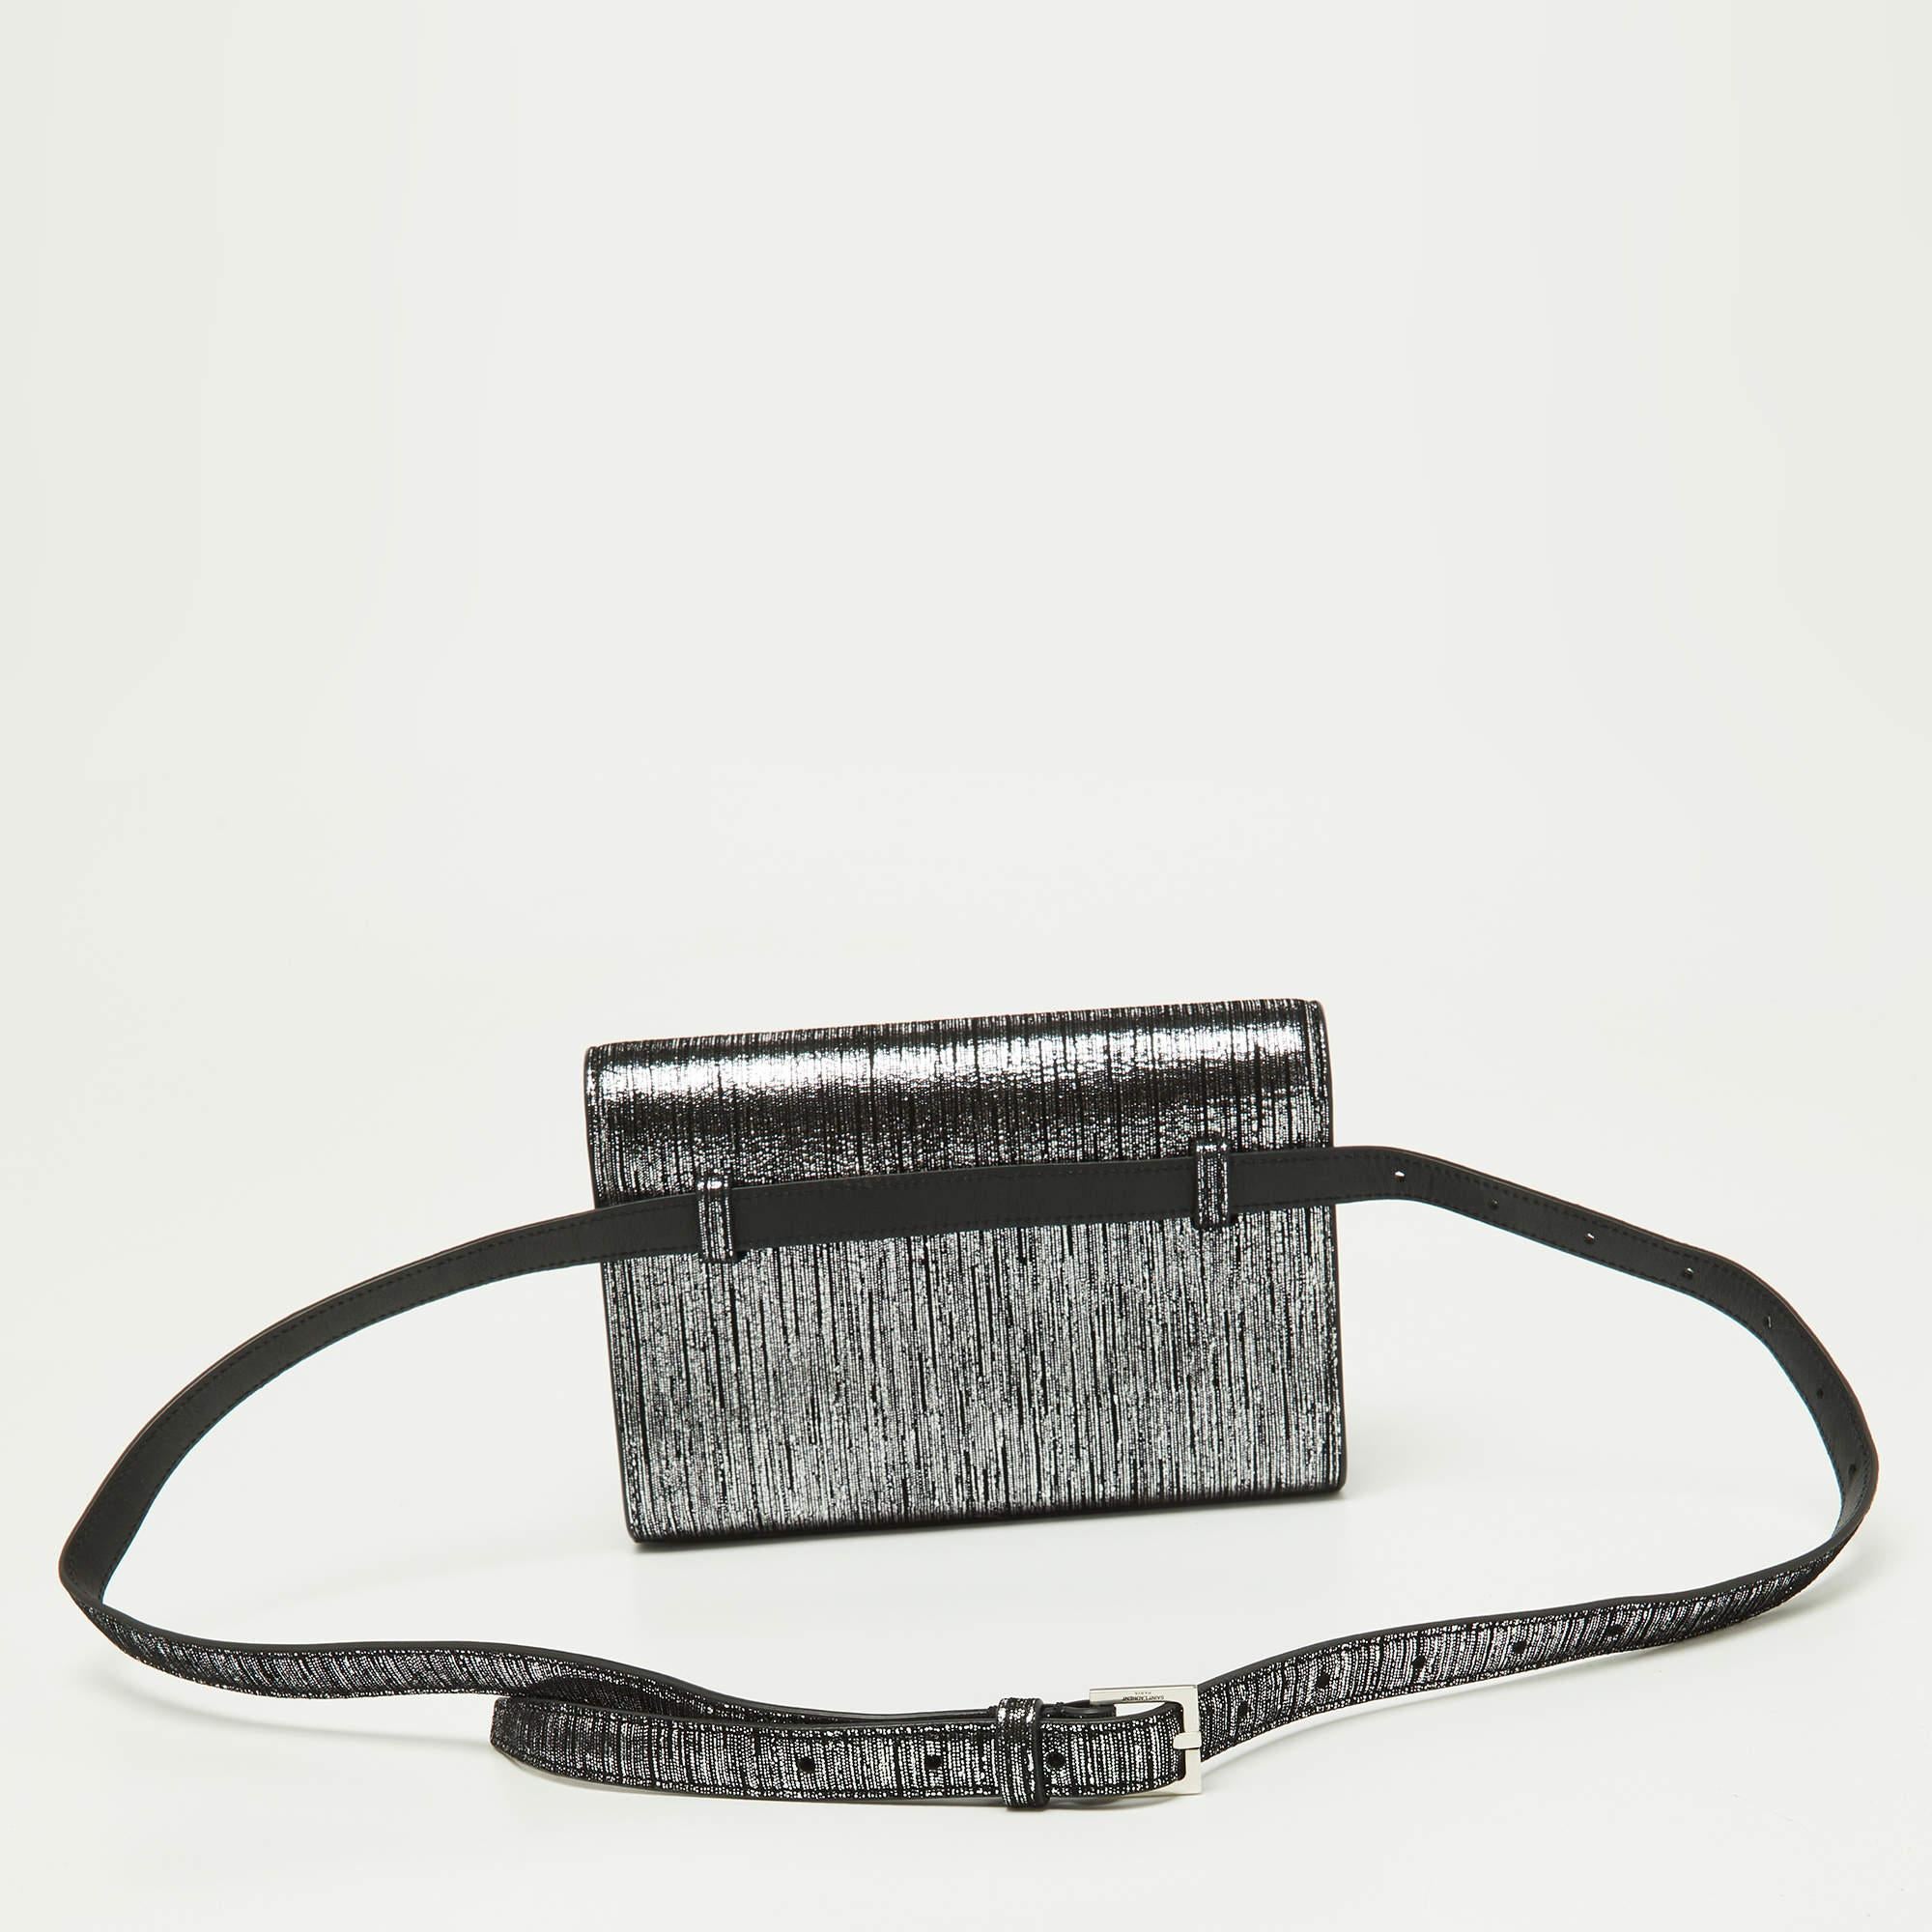 This uber-stylish Saint Laurent waist belt bag aims to be an elevating piece. It is carefully created using suede and has the YSL logo on the front. See how it transforms a T-shirt dress or a solid jumpsuit!

Includes: Original Dustbag, Info